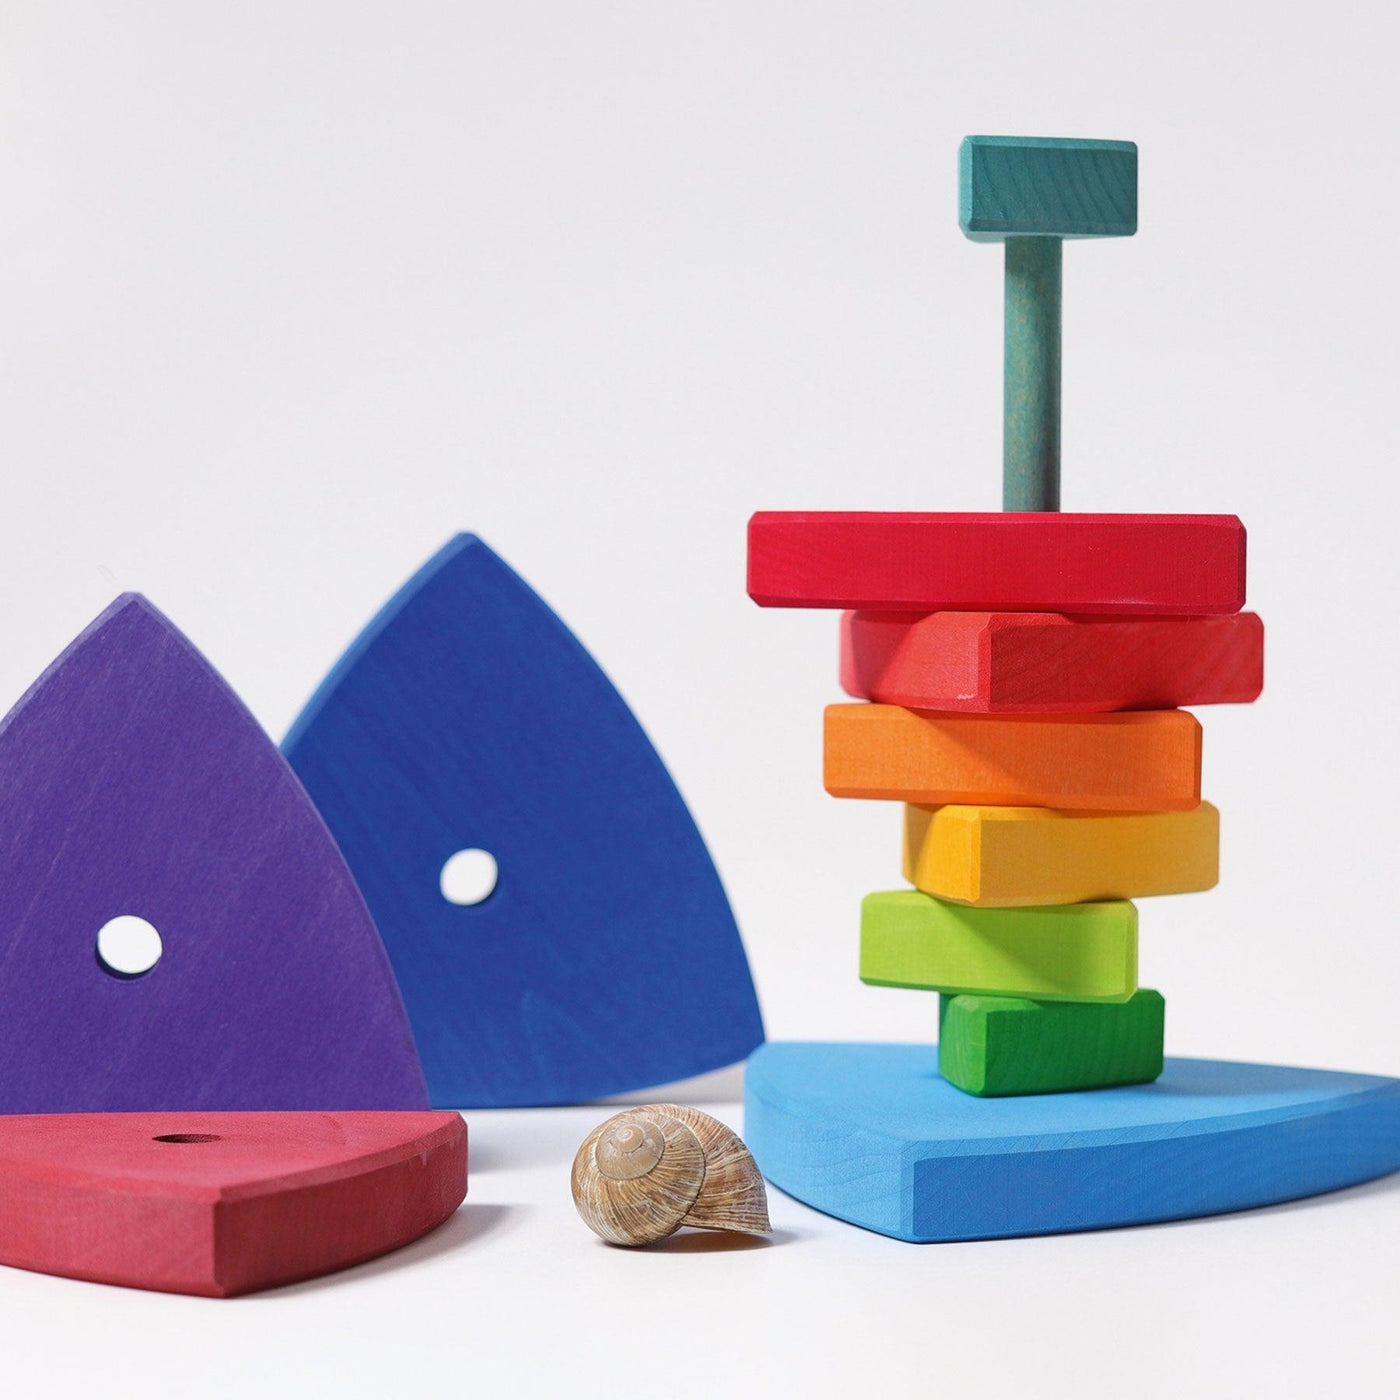 Conical Tower Wankel Stacking Toy-Grimm's-Yes Bebe